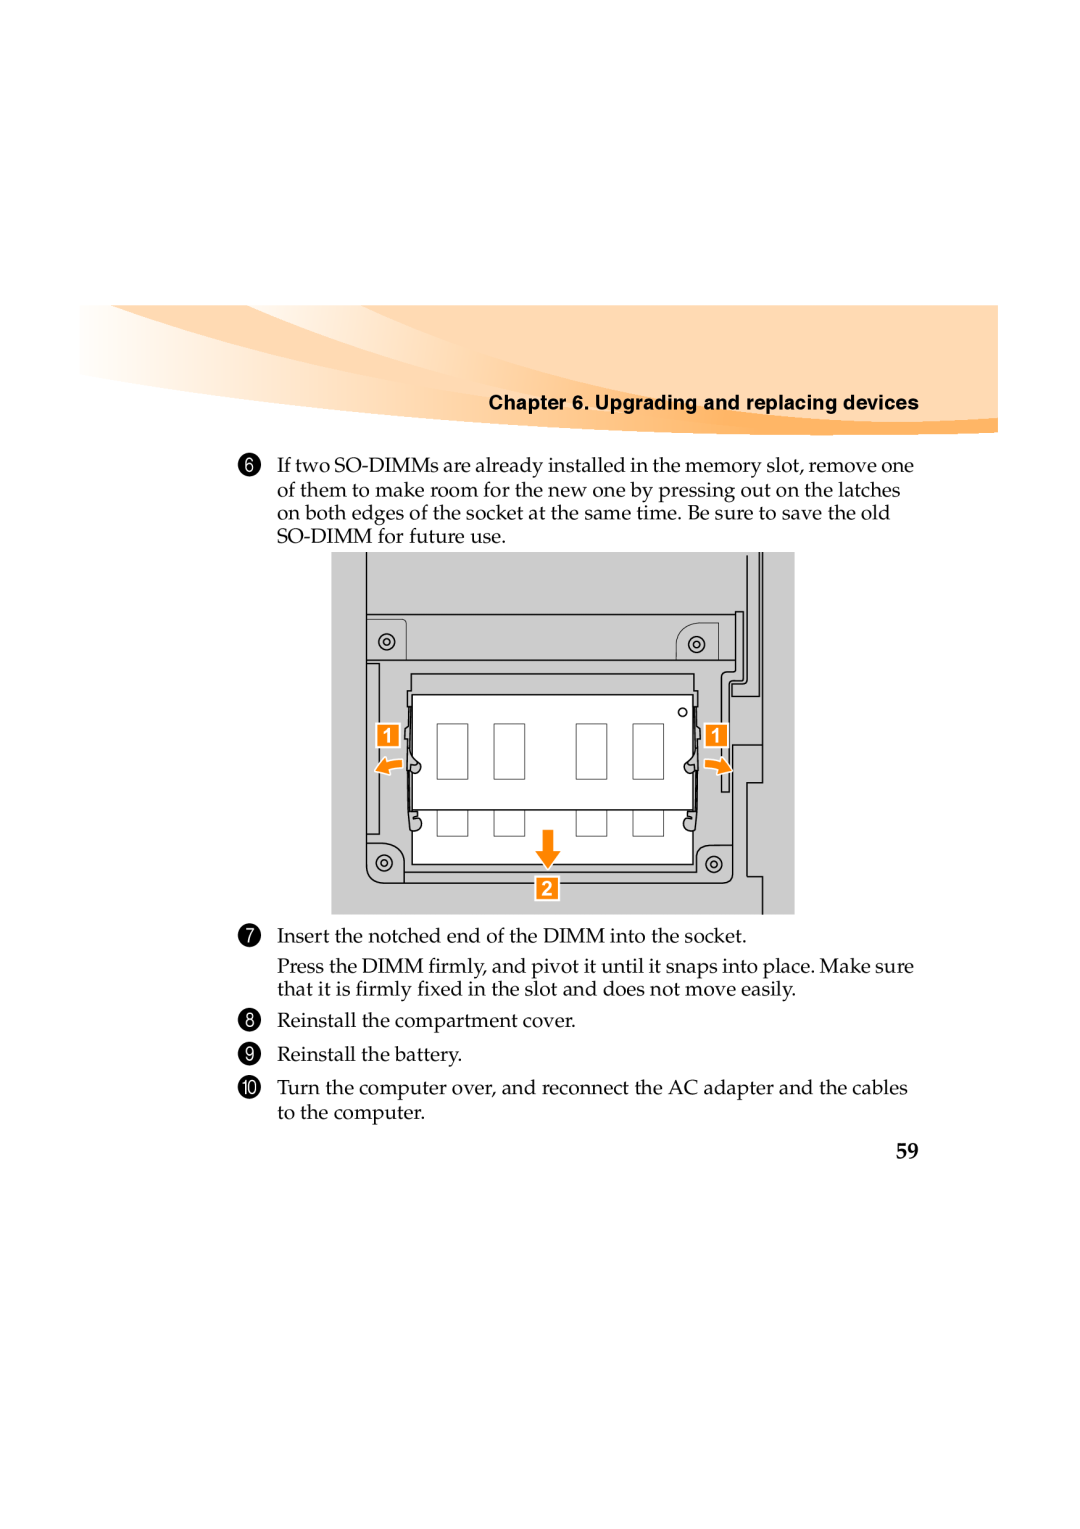 Lenovo Y460 manual Upgrading and replacing devices, Insert the notched end of the DIMM into the socket 